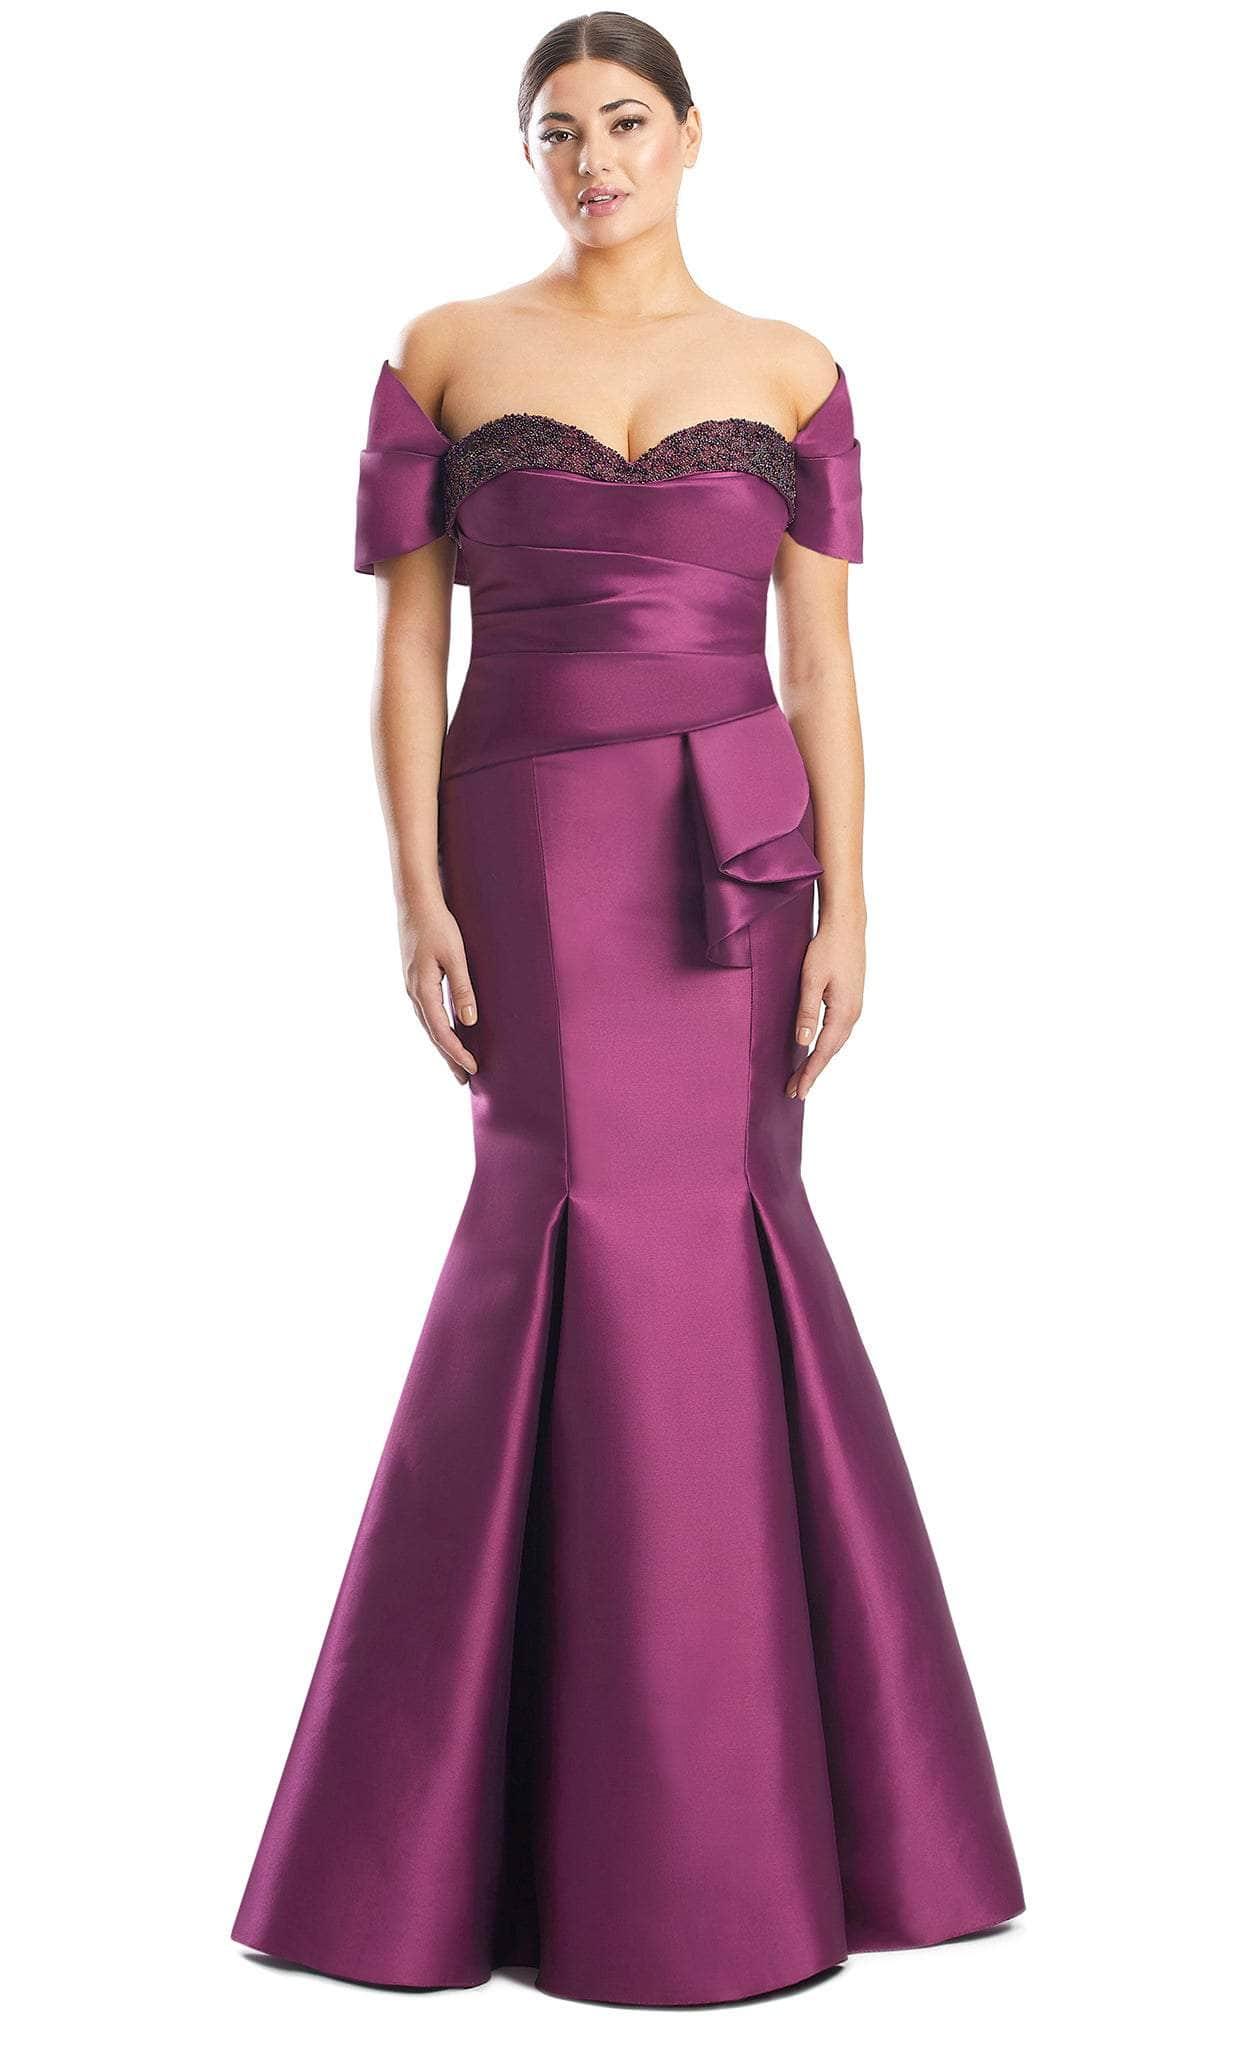 Alexander by Daymor 1759S23 - Strapless with Shawl Evening Dress Evening Dresses 00 / Plum